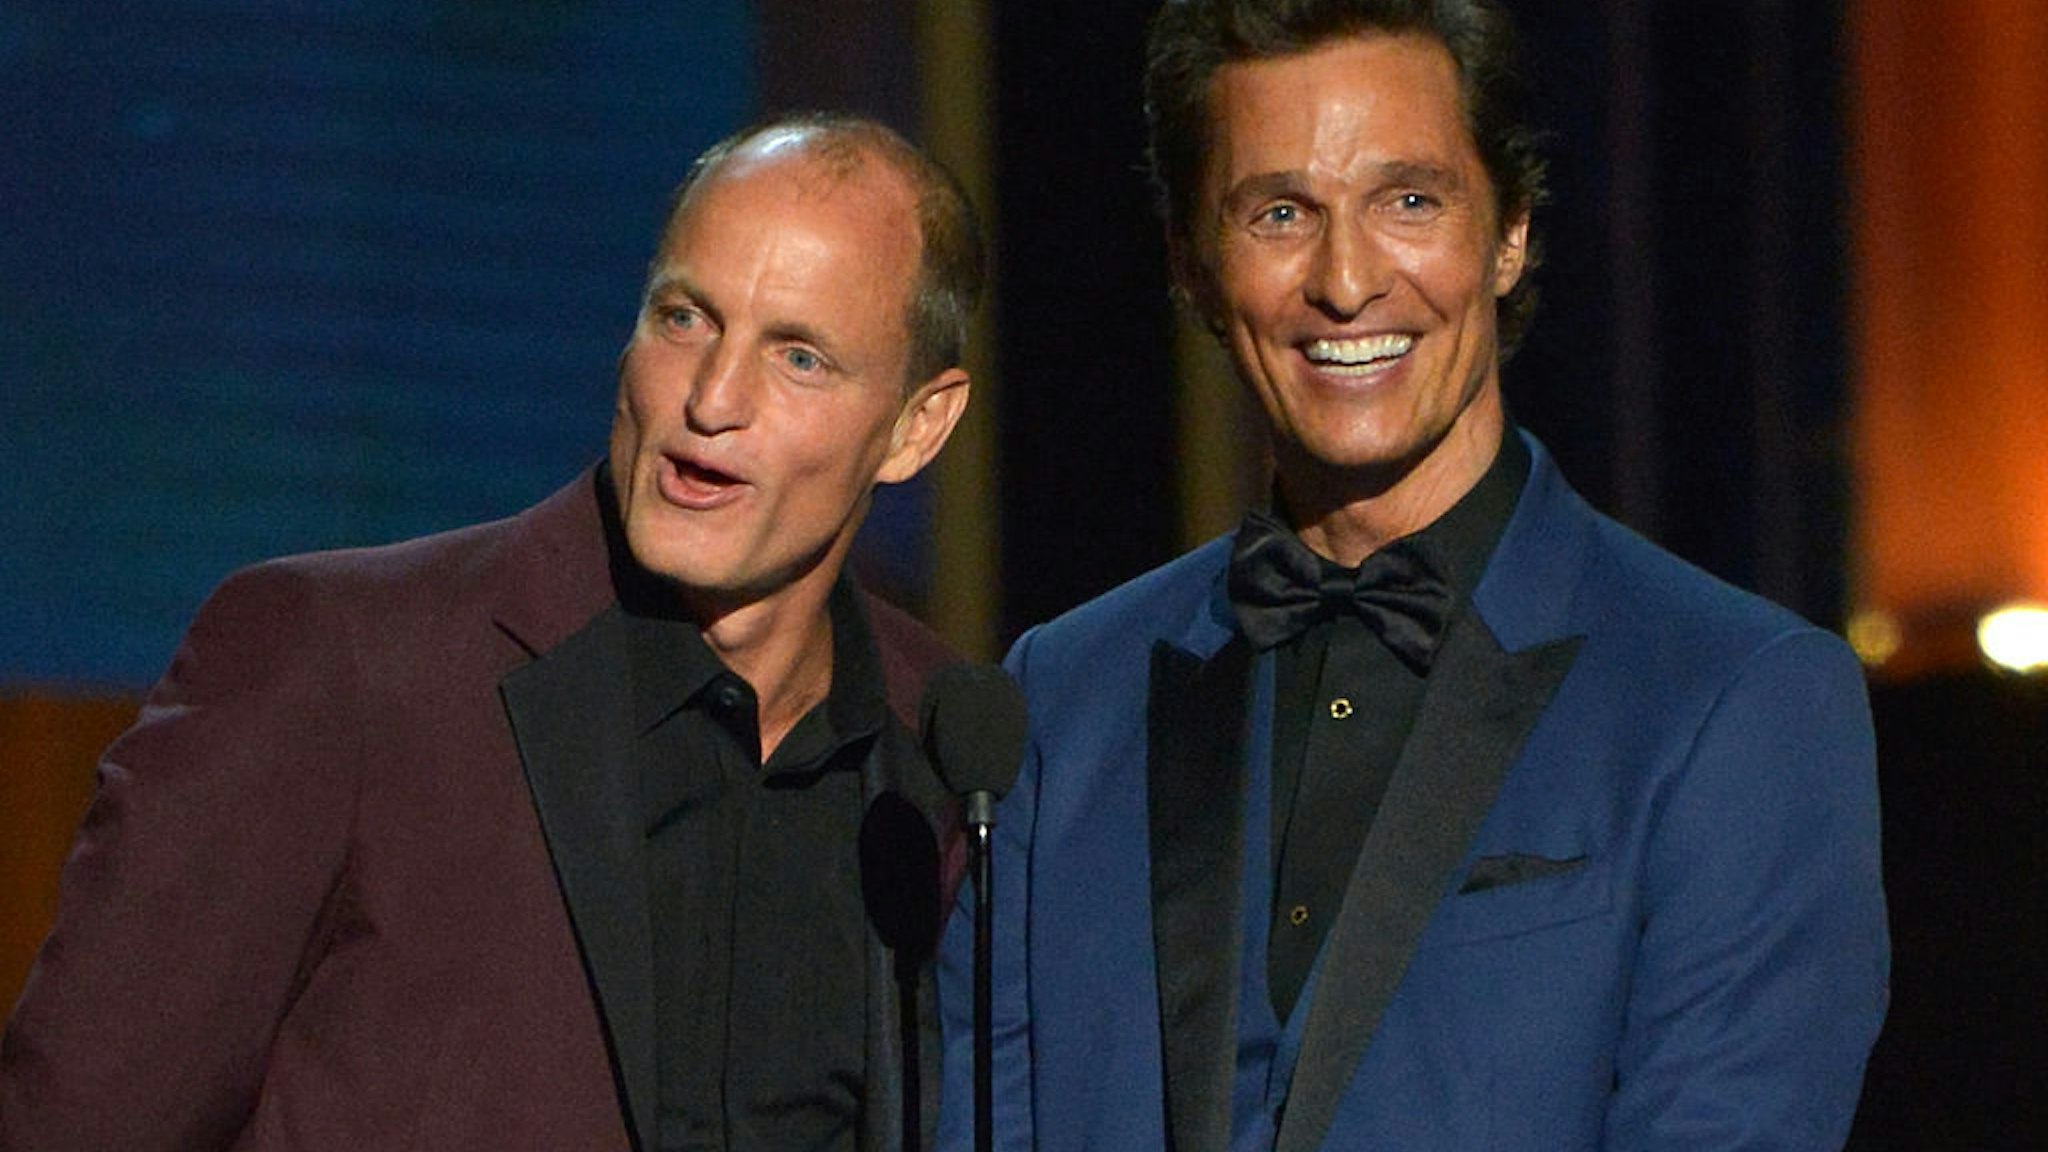 LOS ANGELES, CA - AUGUST 25: Actors Woody Harrelson (L) and Matthew McConaughey speak onstage at the 66th Annual Primetime Emmy Awards held at Nokia Theatre L.A. Live on August 25, 2014 in Los Angeles, California. (Photo by Lester Cohen/WireImage)